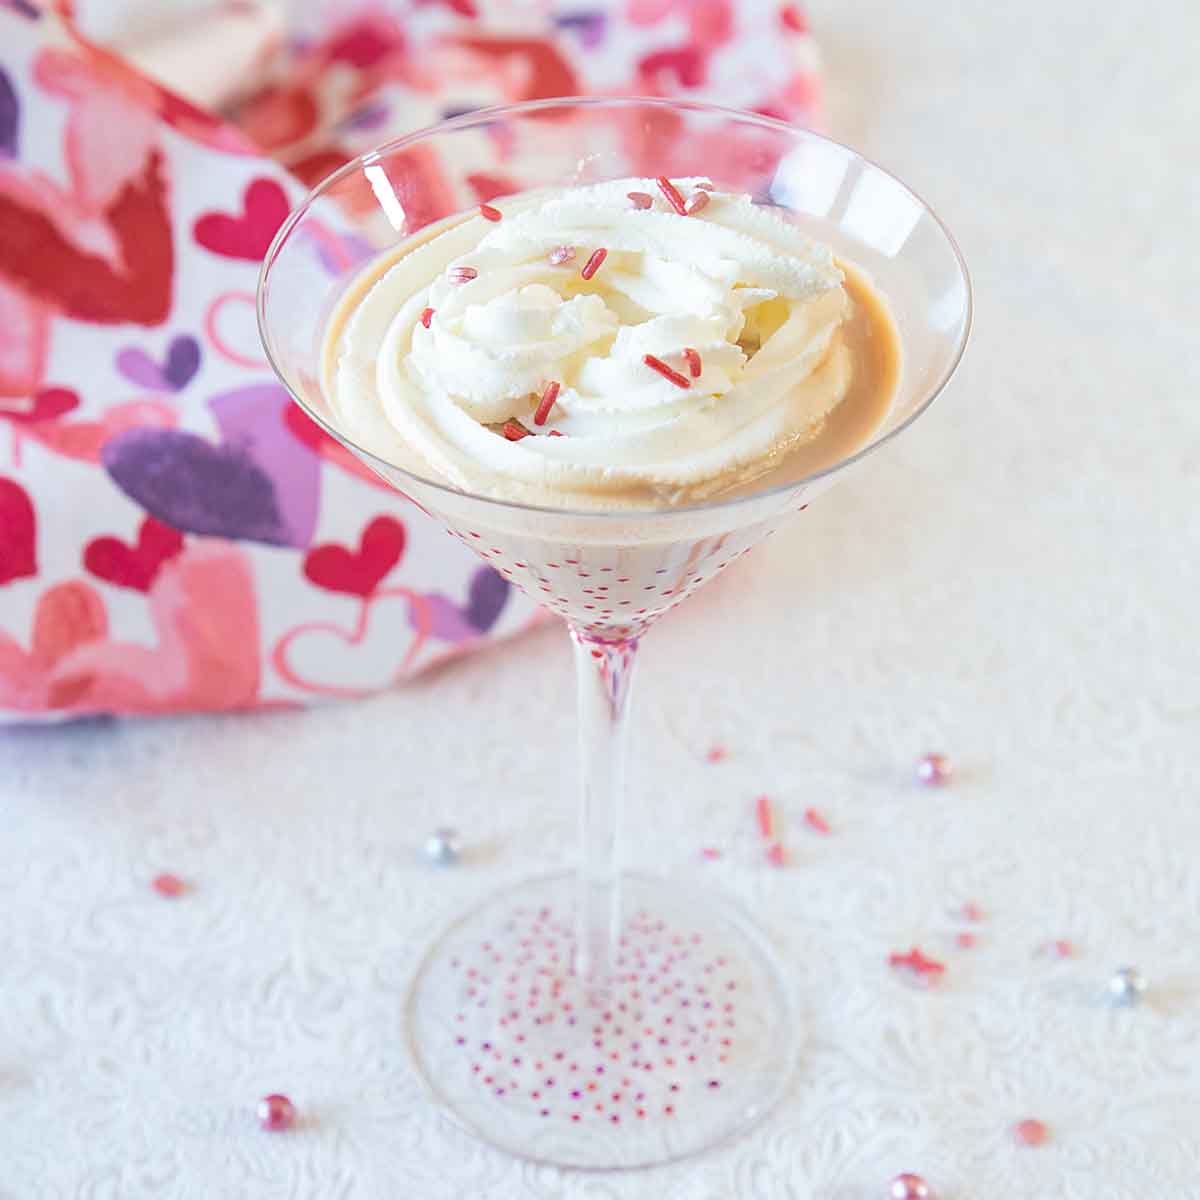 Sweet, creamy and chocolatey, this Baileys Chocolate Martini is a perfect Valentine's Day Cocktail.  Or dessert or after dinner drink!